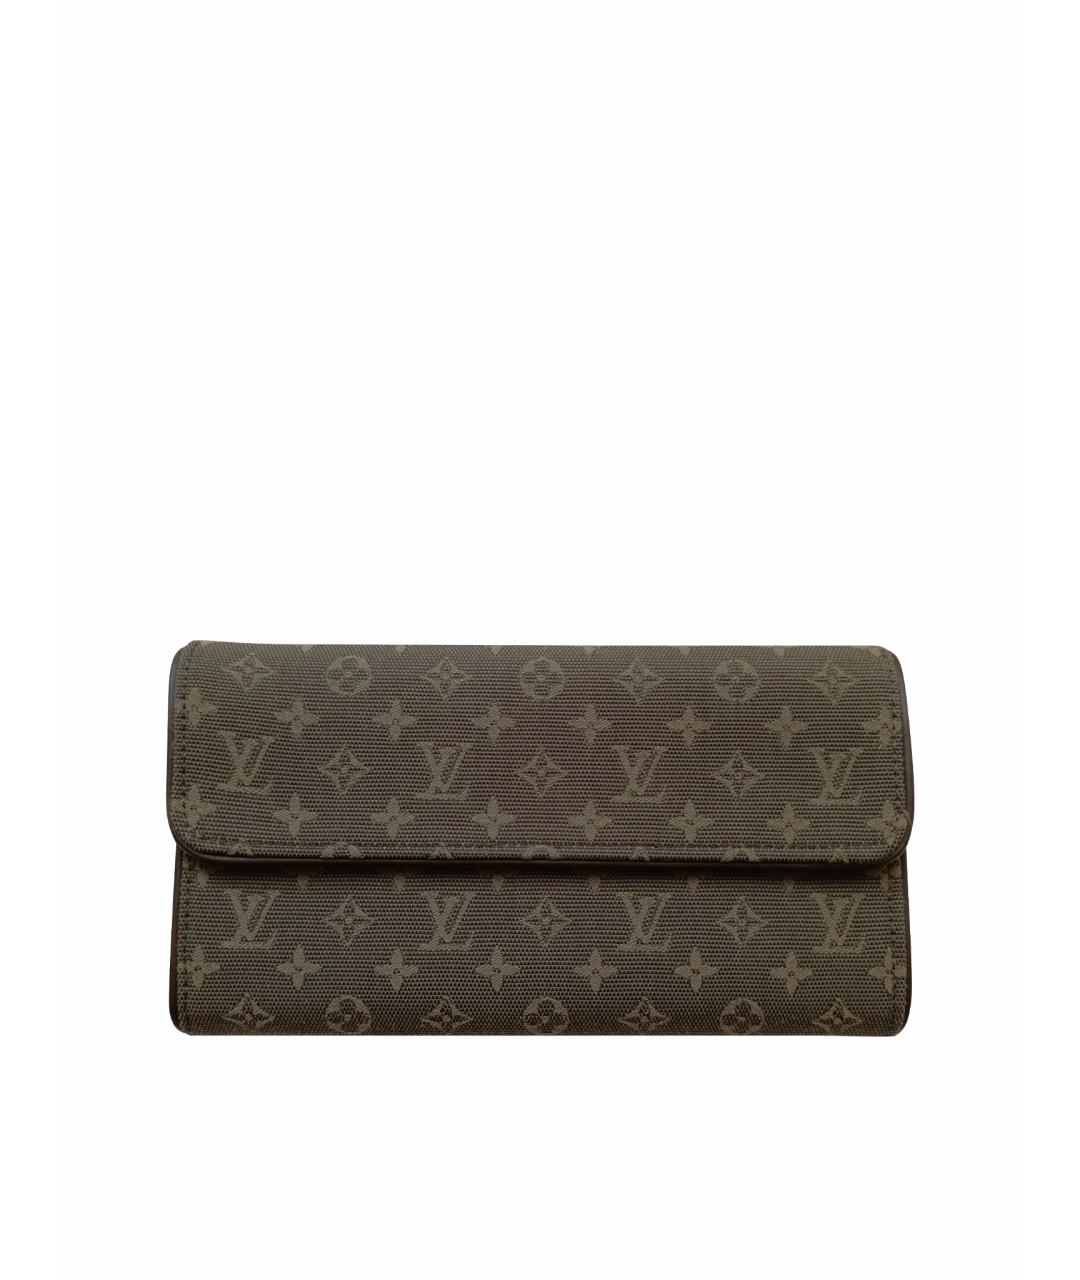 LOUIS VUITTON PRE-OWNED Хаки кошелек, фото 1